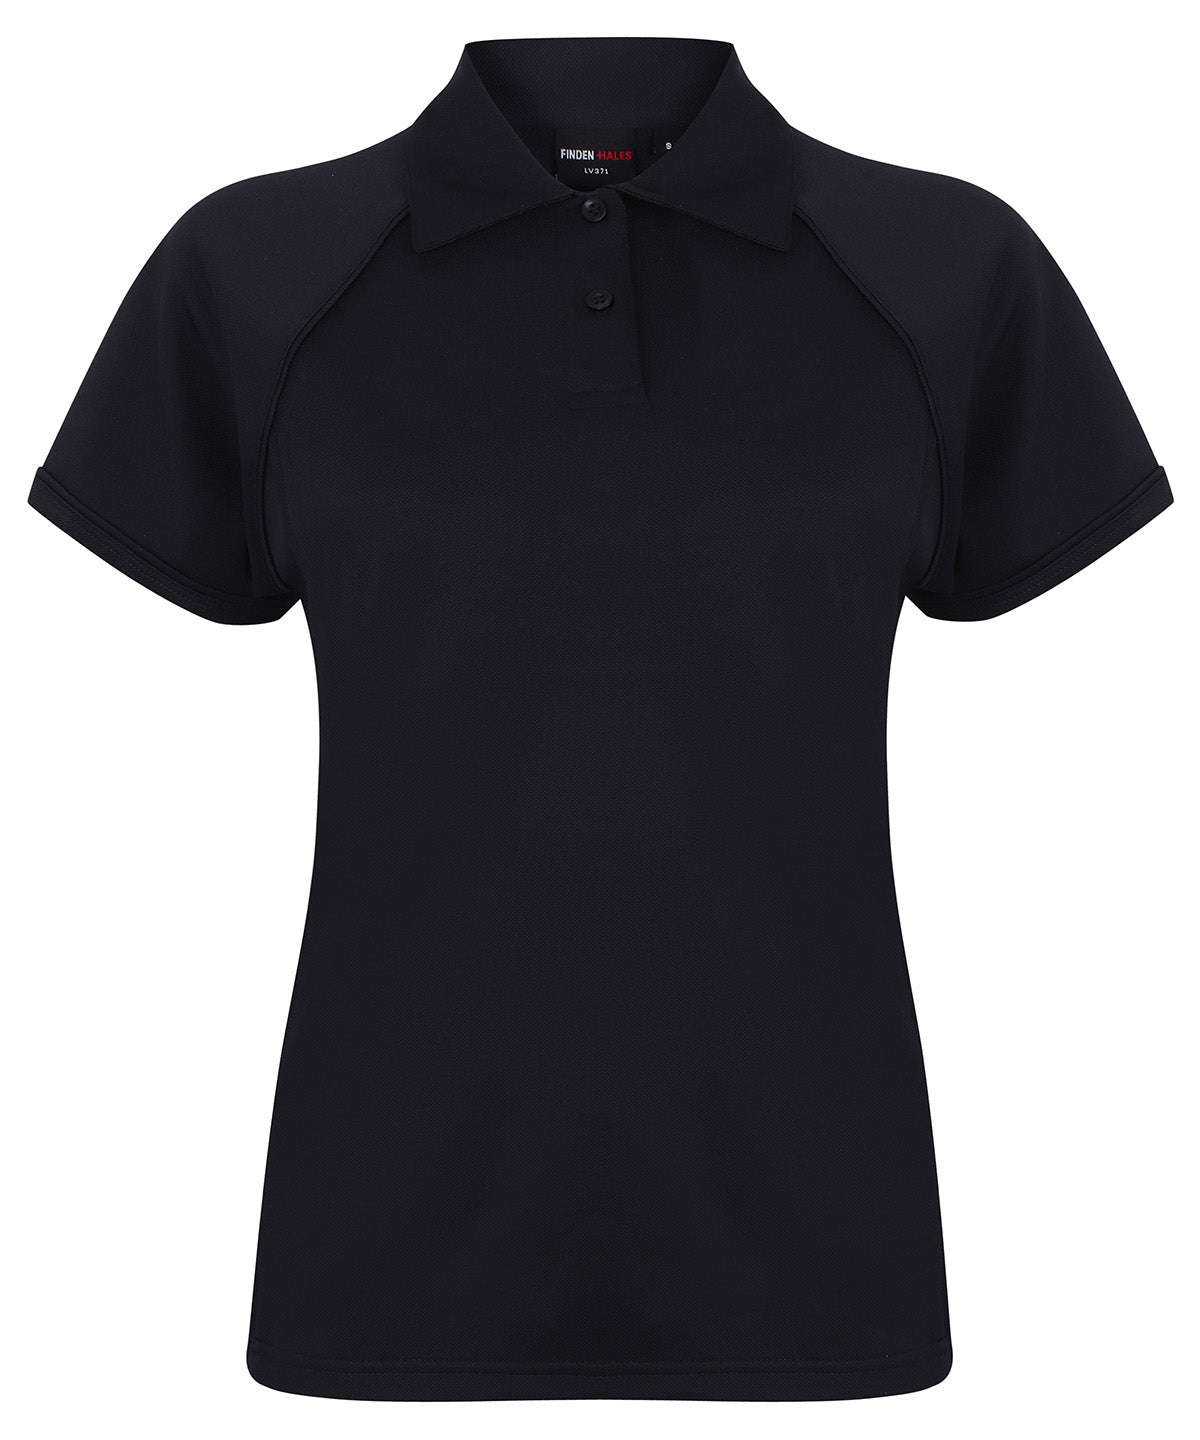 Personalised Polo Shirts - Black Finden & Hales Women's piped performance polo